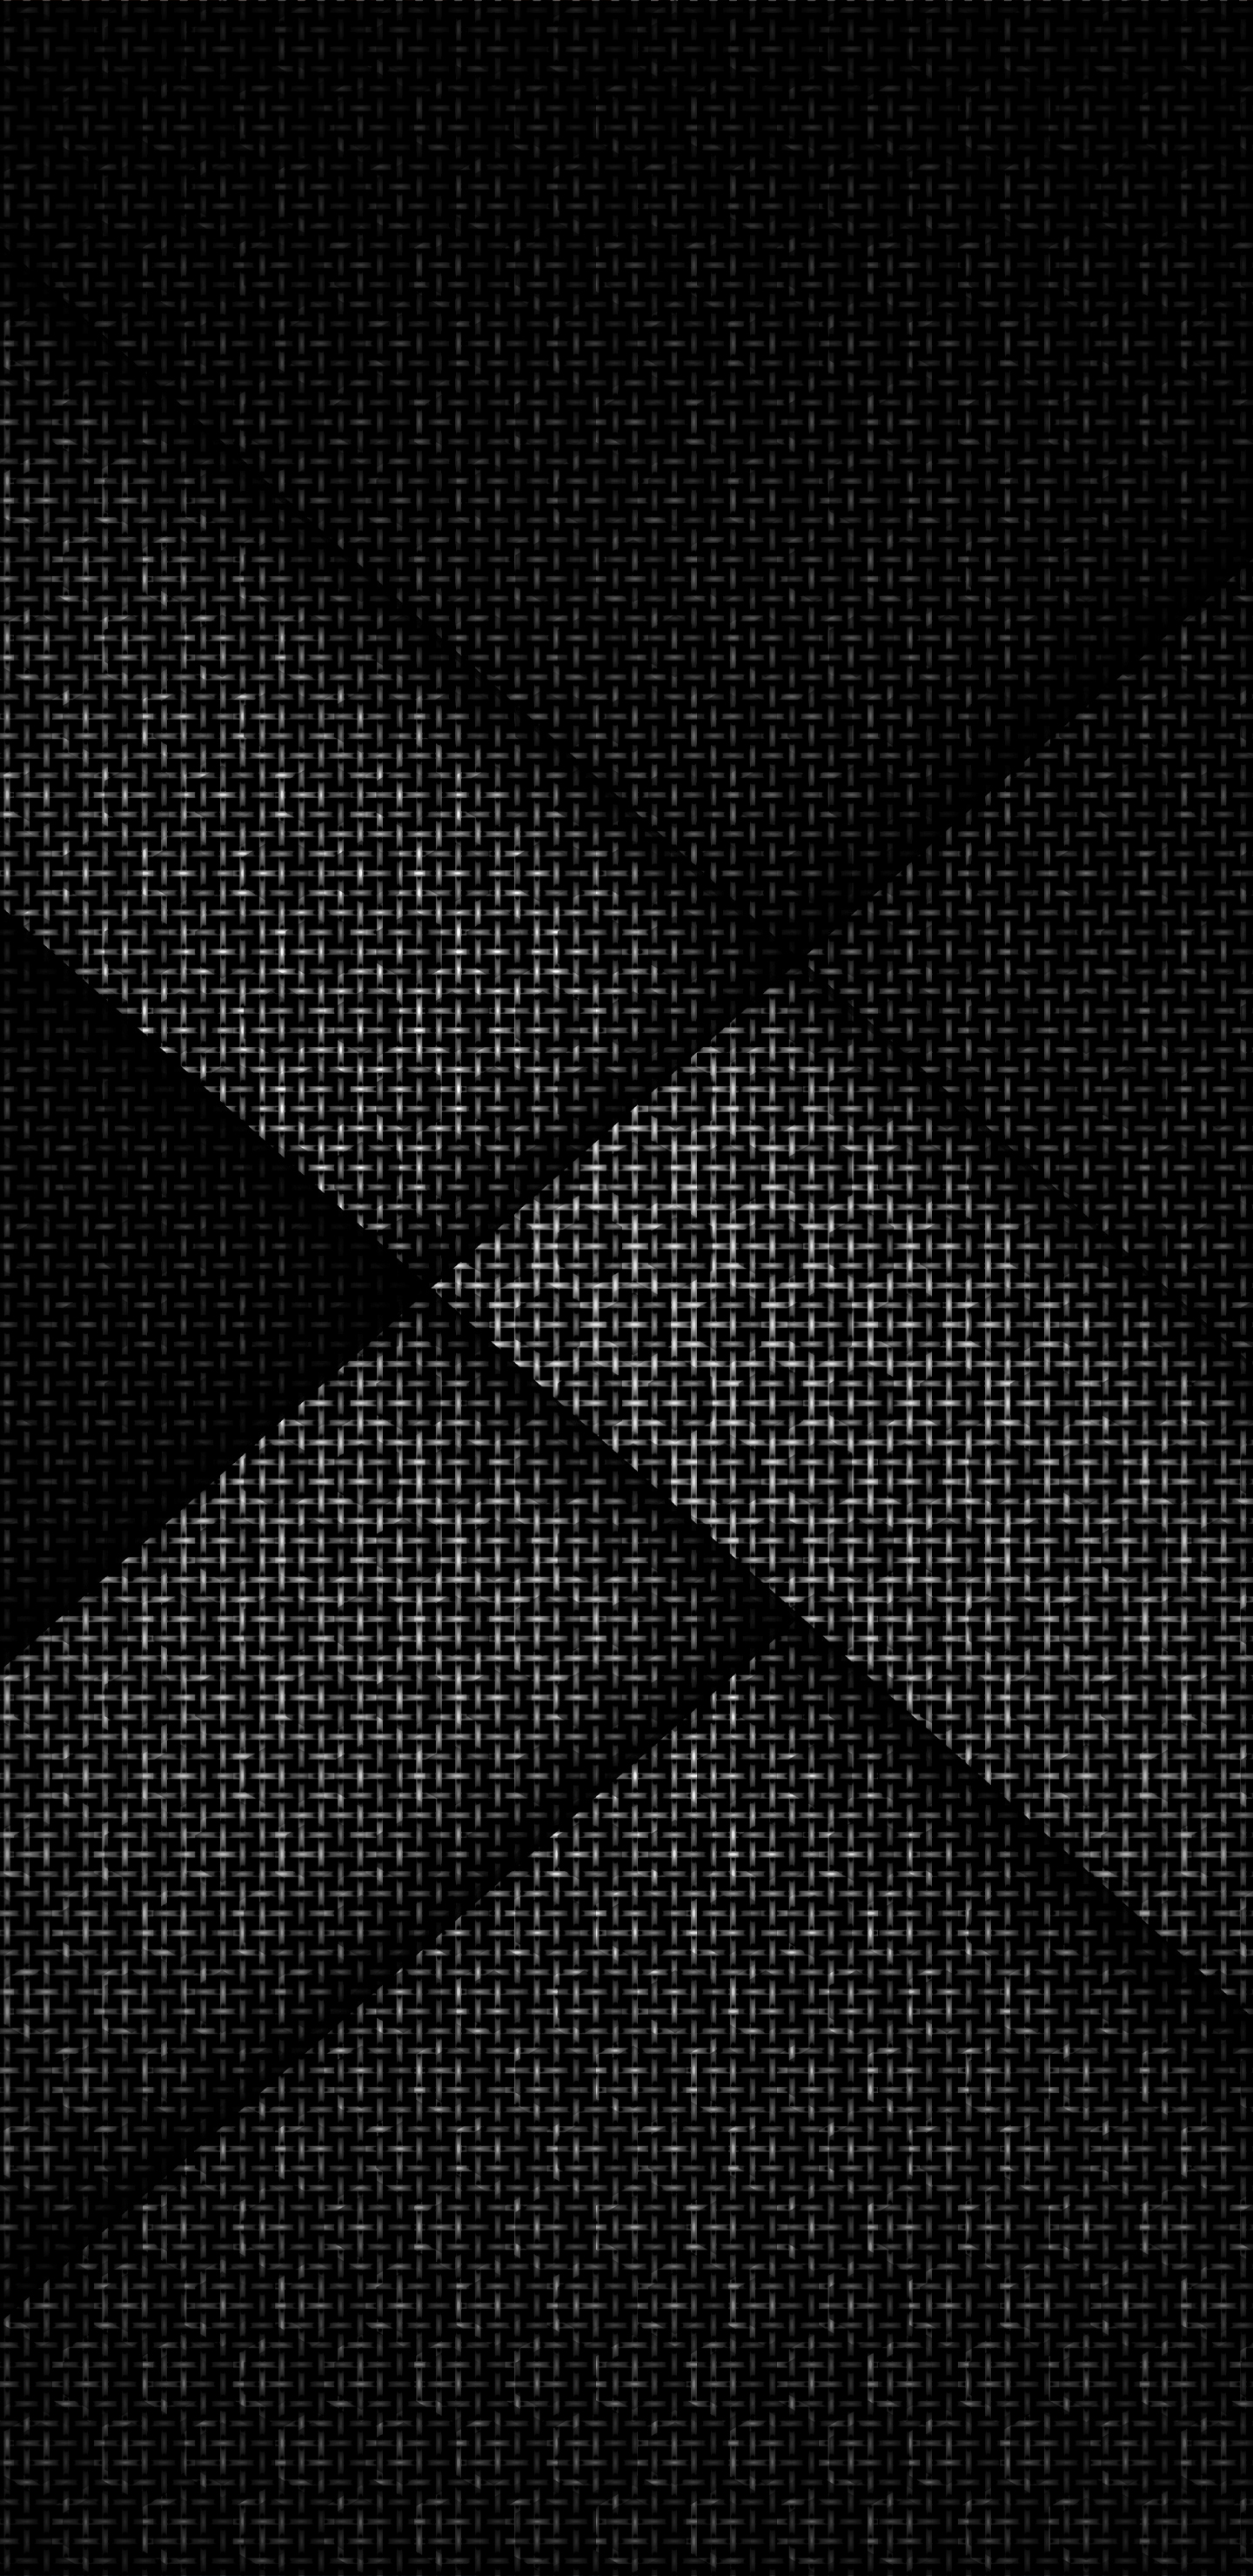 Download wallpaper 1440x2960 cube black grids texture abstract samsung  galaxy s8 samsung galaxy s8 plus 1440x2960 hd background 17534